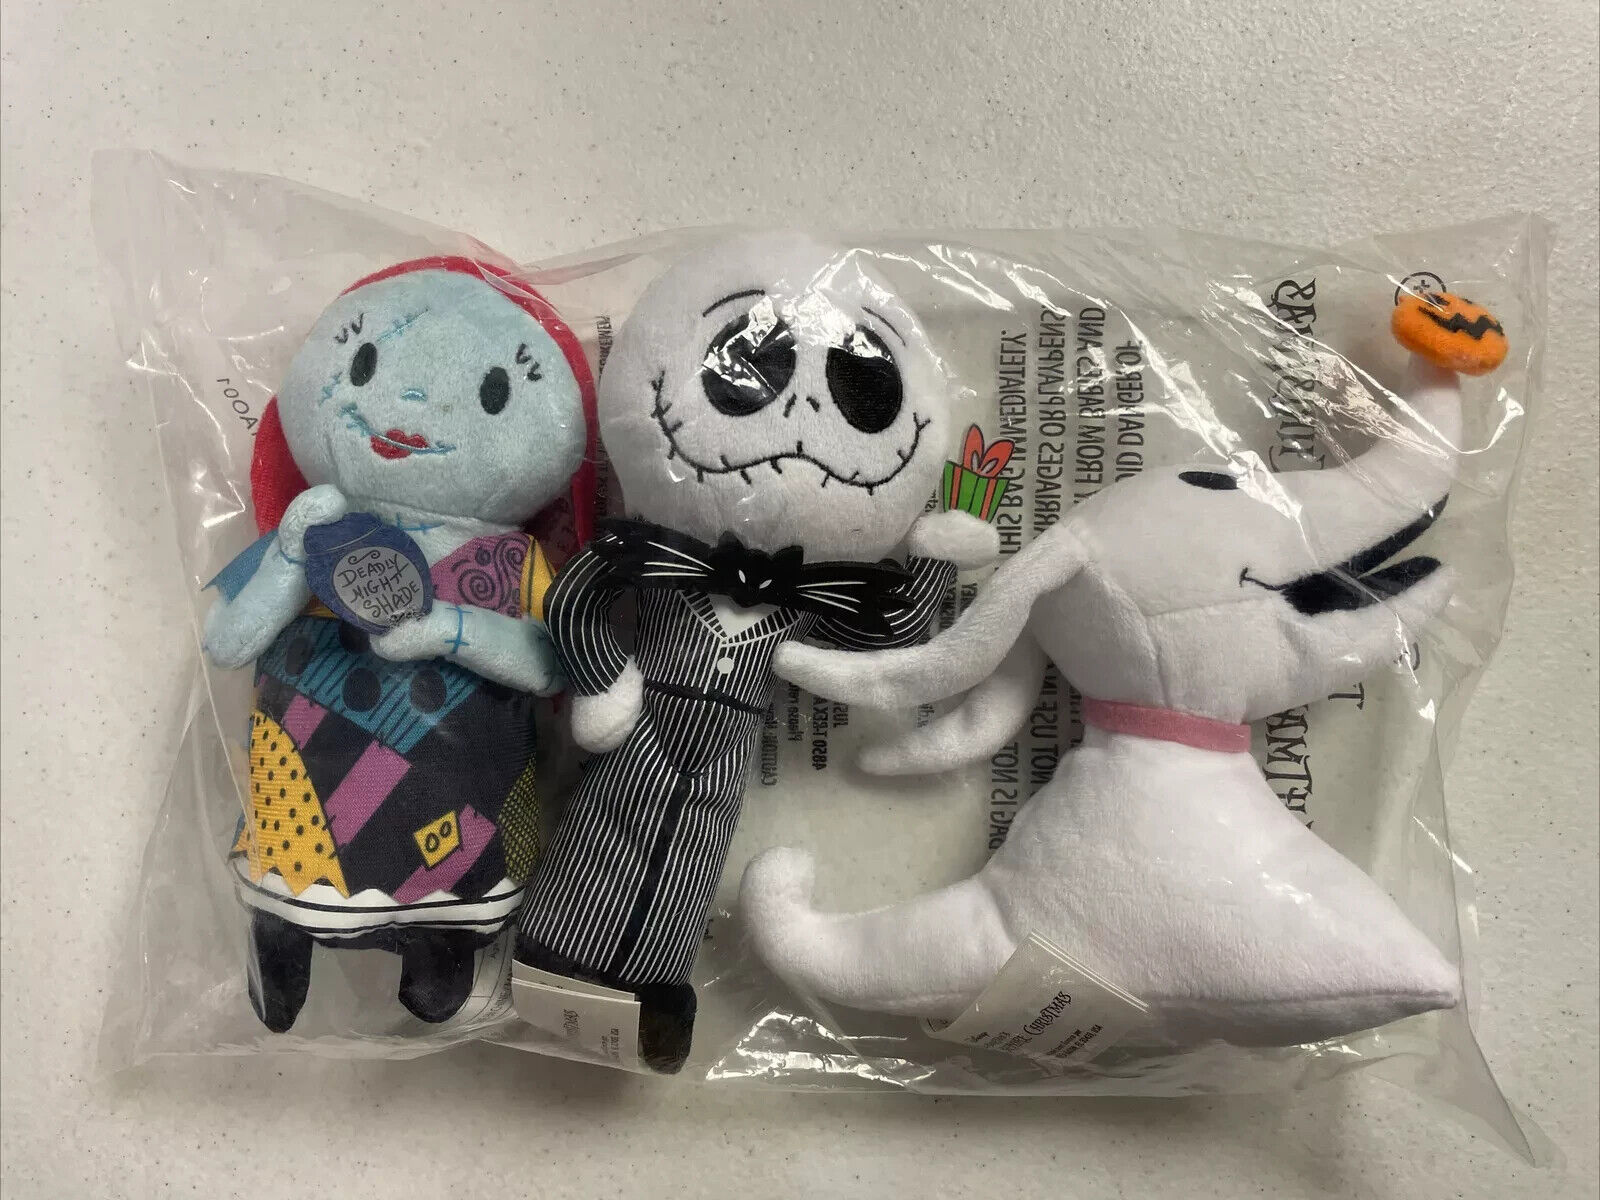 Disney Just Play Nightmare Before Christmas Stylized Bean Bag Plush 3-Pack NEW